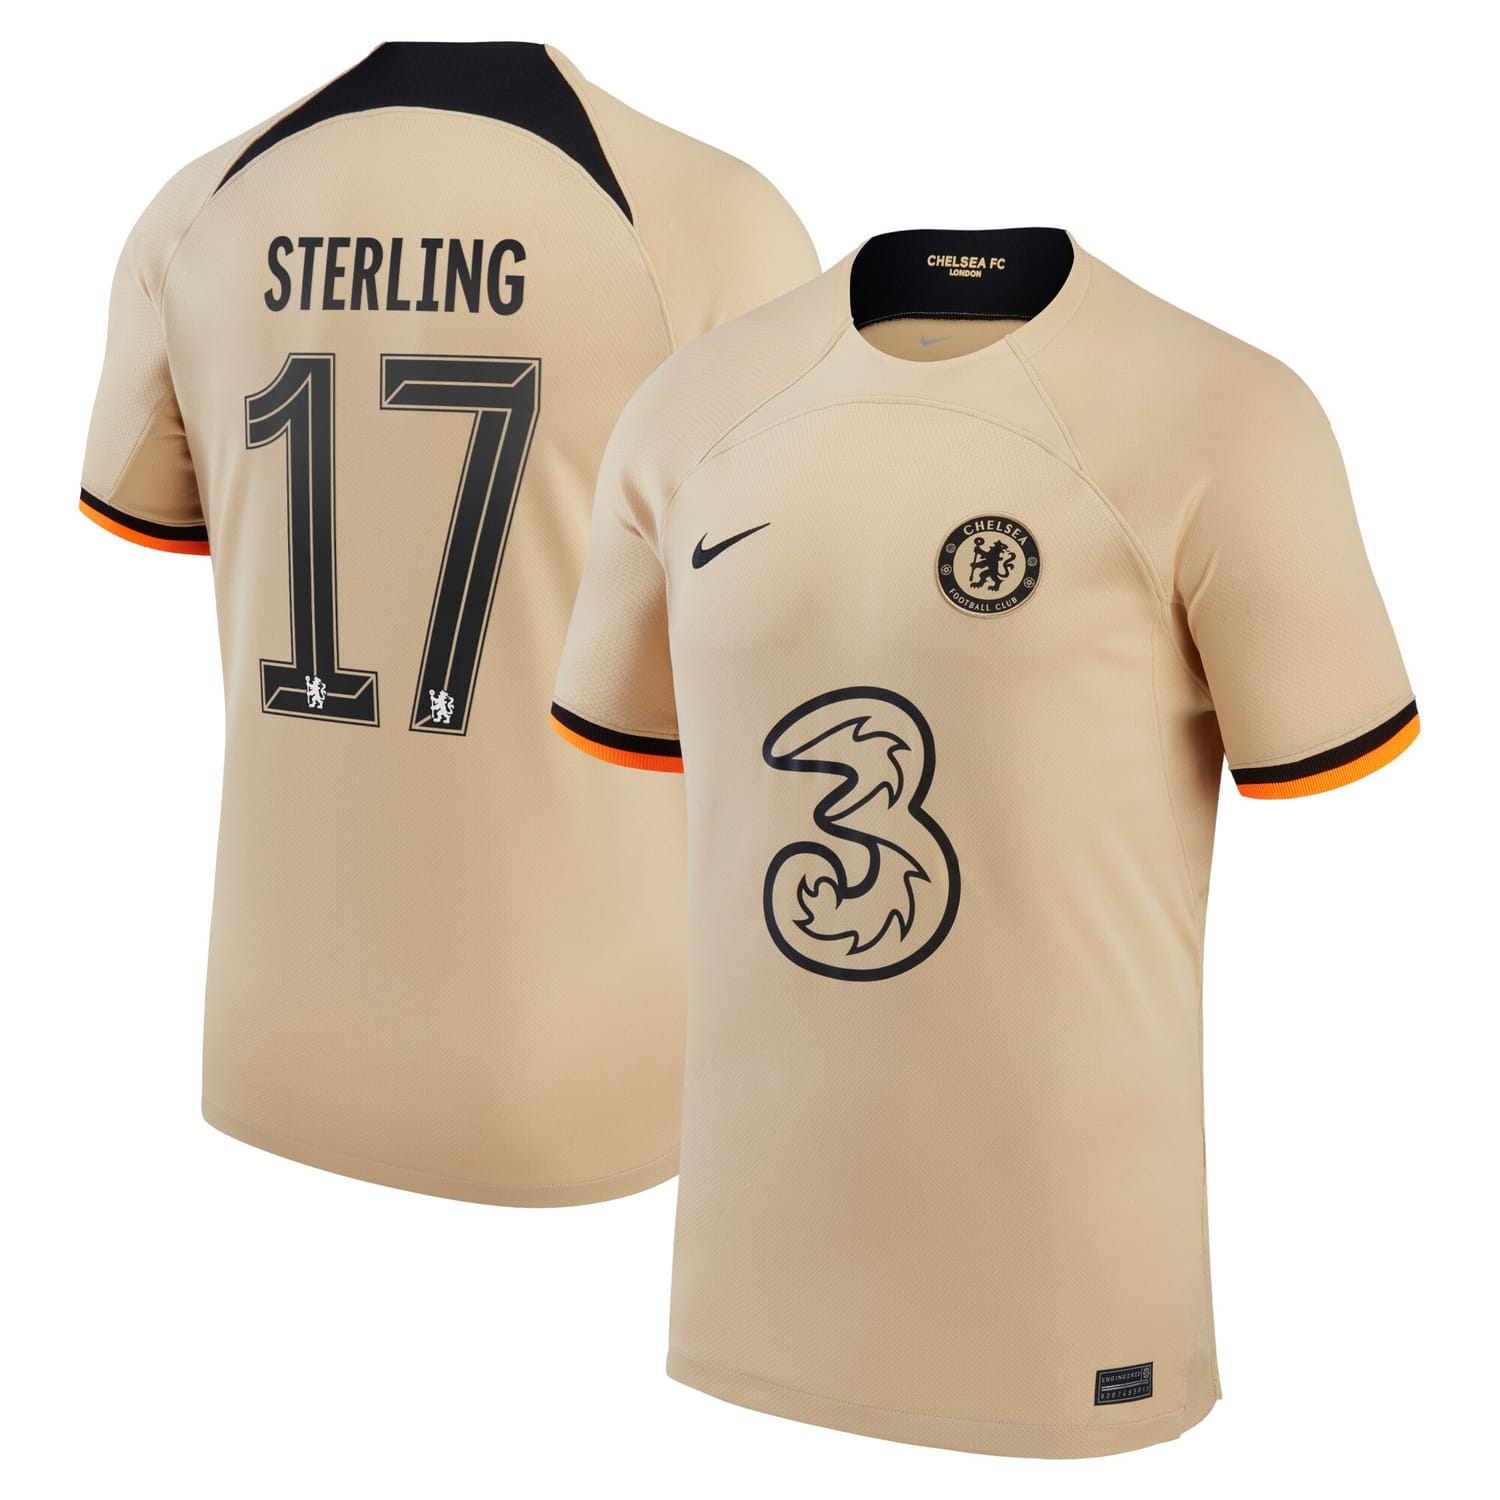 Premier League Chelsea Third Cup Jersey Shirt 2022-23 player Raheem Sterling 17 printing for Men